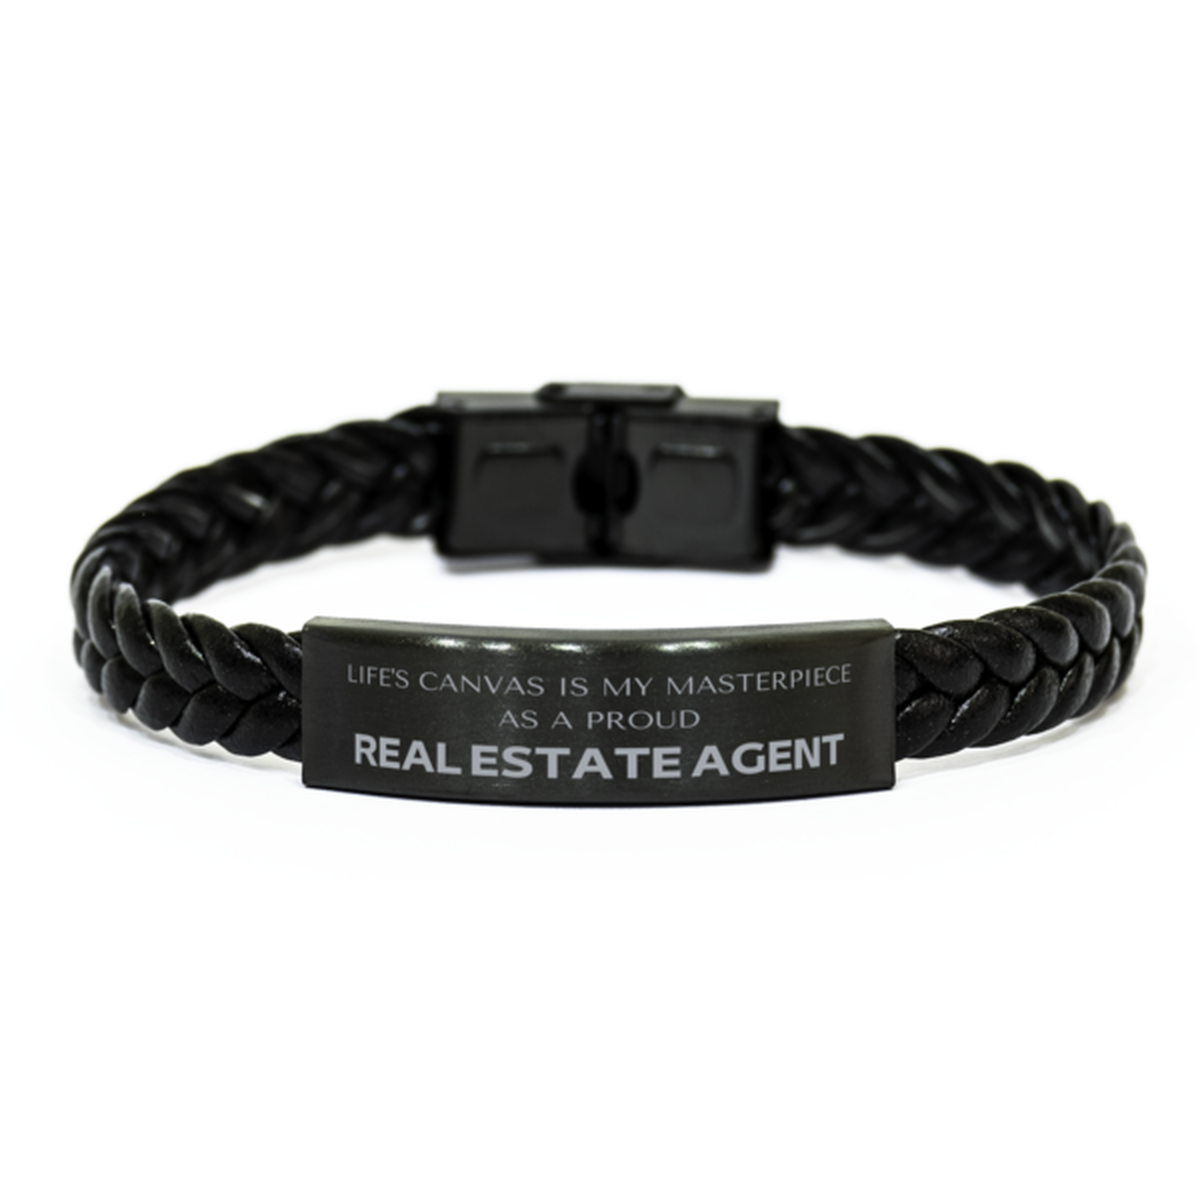 Proud Real Estate Agent Gifts, Life's canvas is my masterpiece, Epic Birthday Christmas Unique Braided Leather Bracelet For Real Estate Agent, Coworkers, Men, Women, Friends